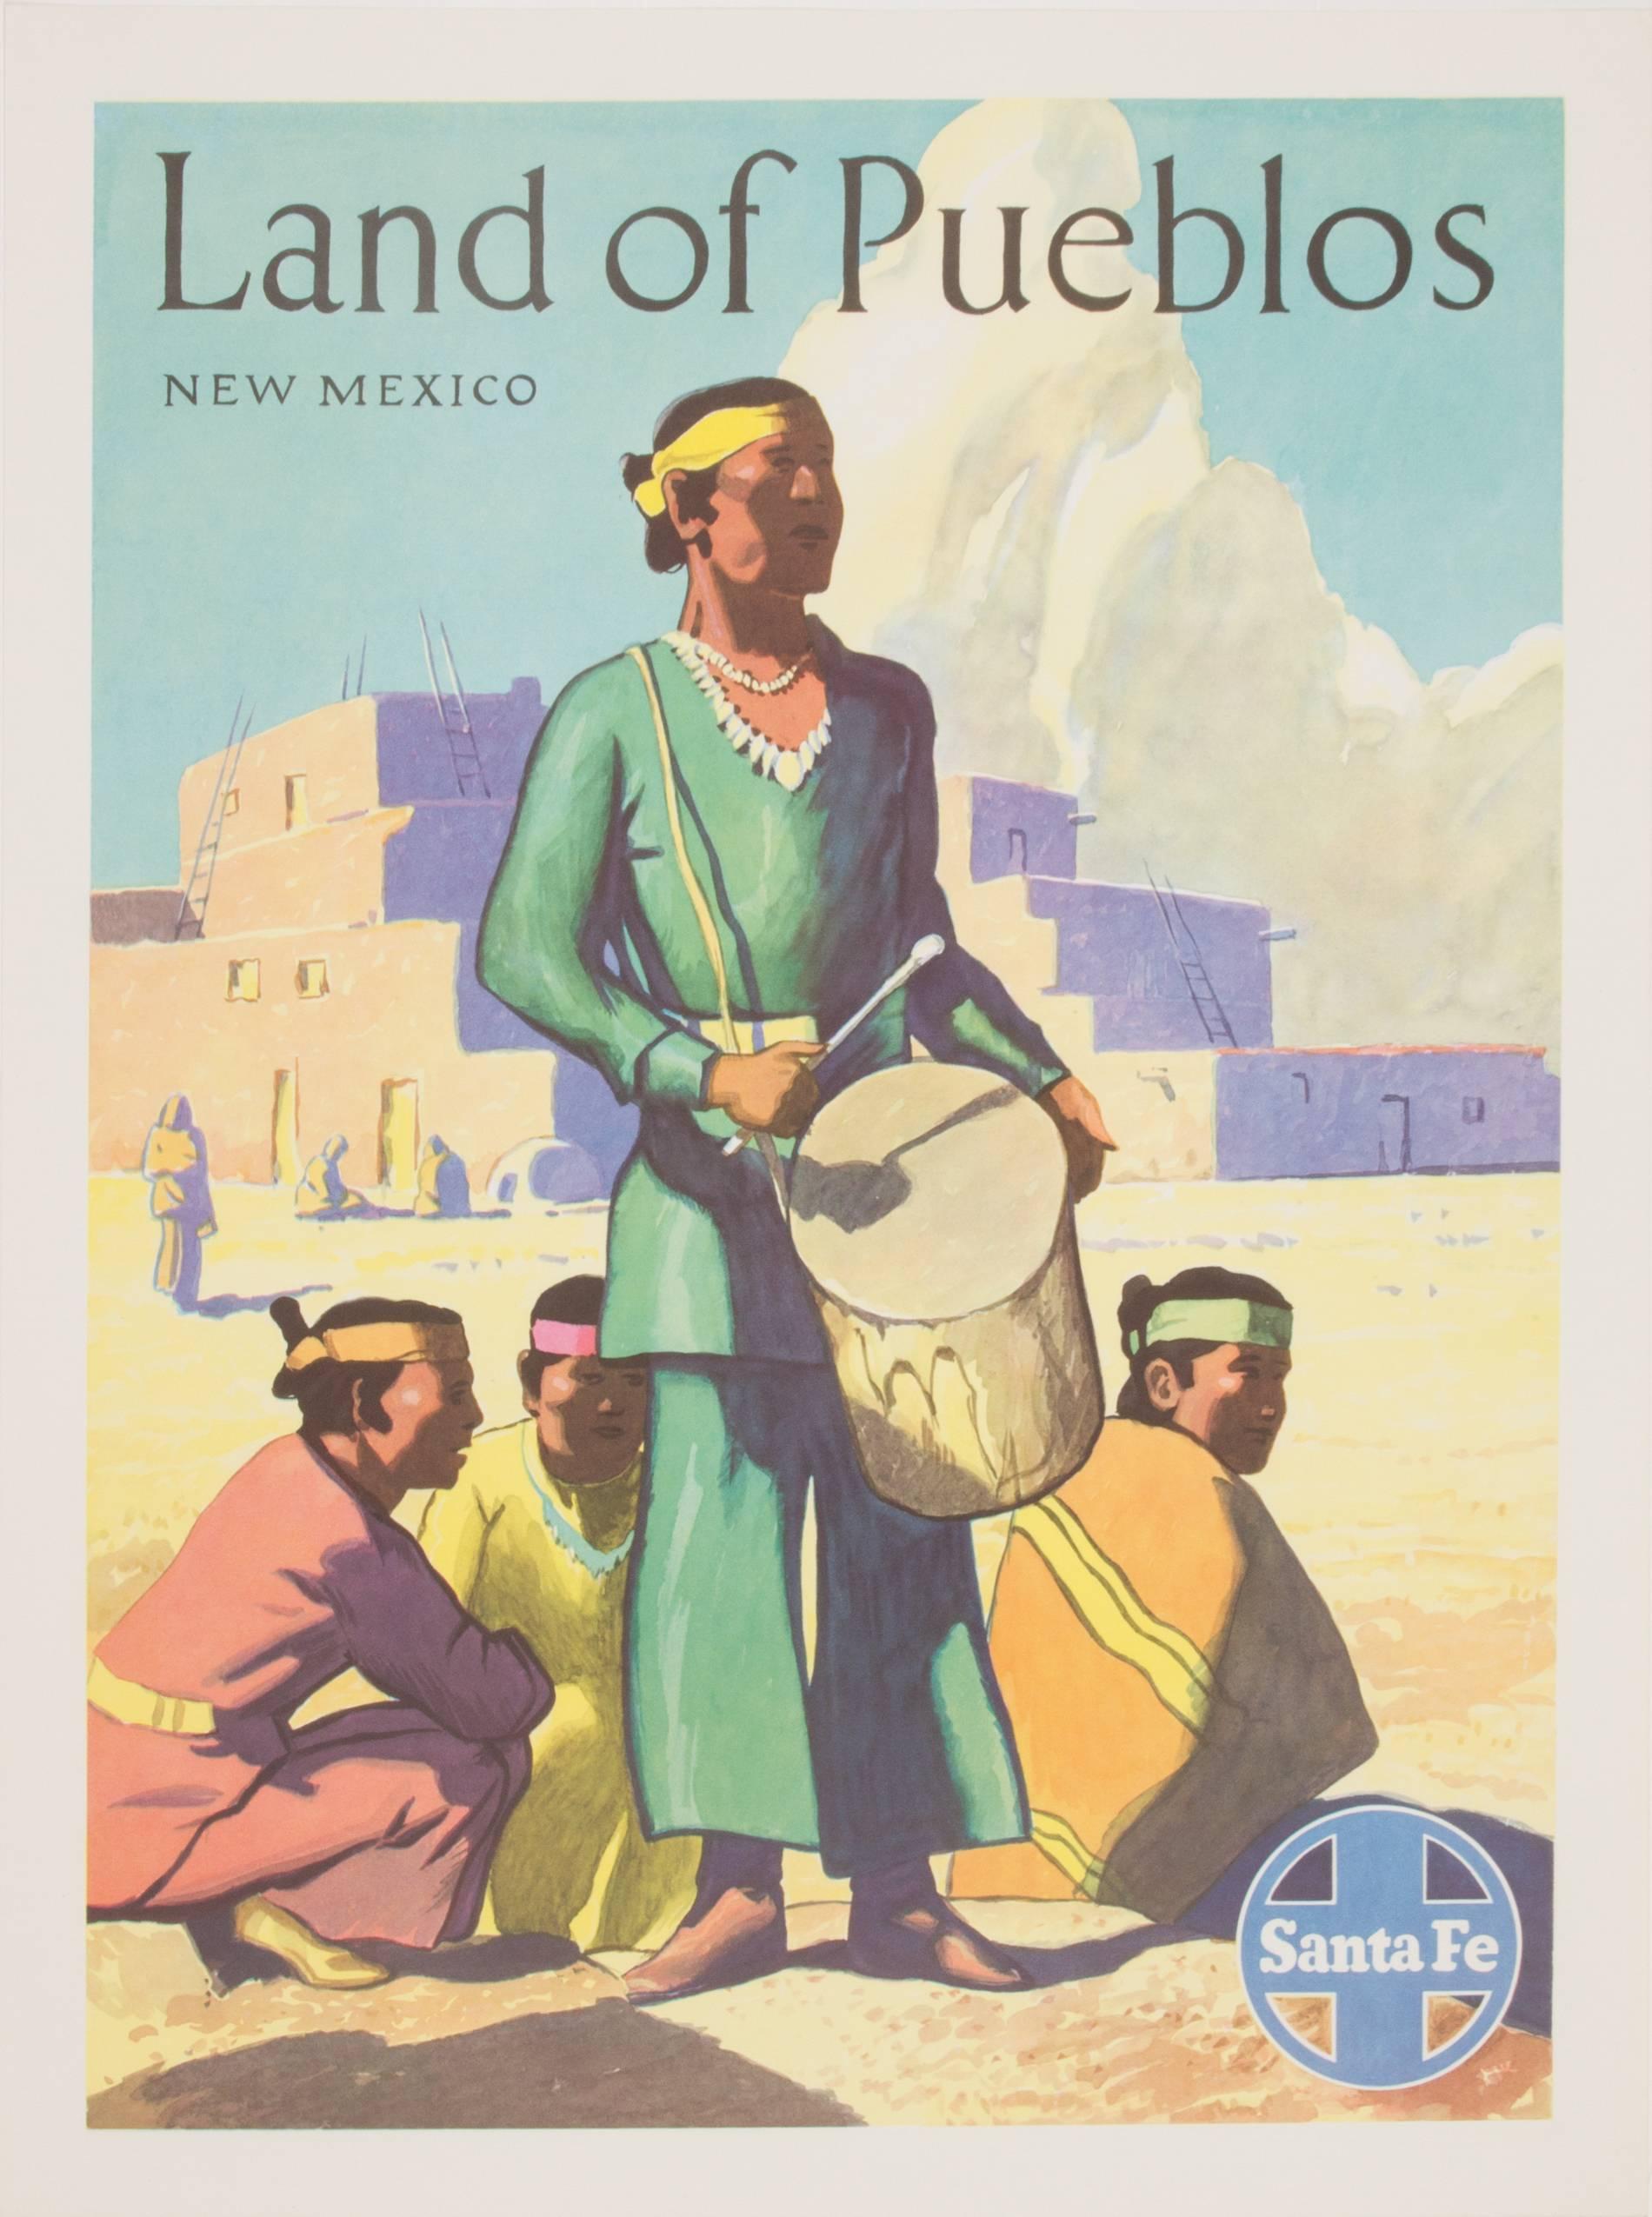 This is a travel poster promoting New Mexico 'the land of the Pueblos'.